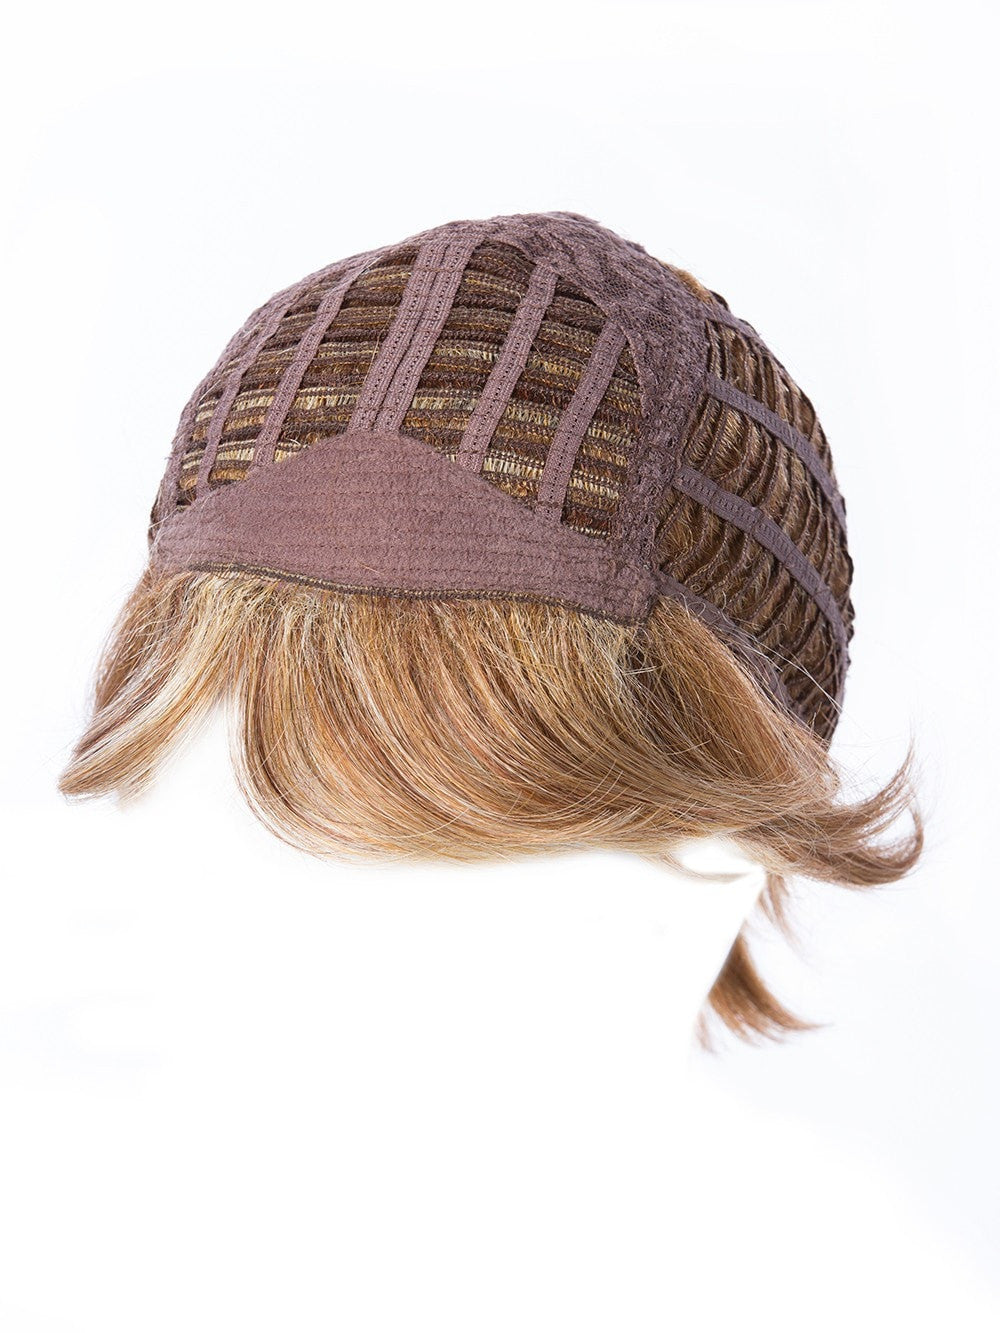 Basic Cap, also known as a capless or traditional construction, has open wefting